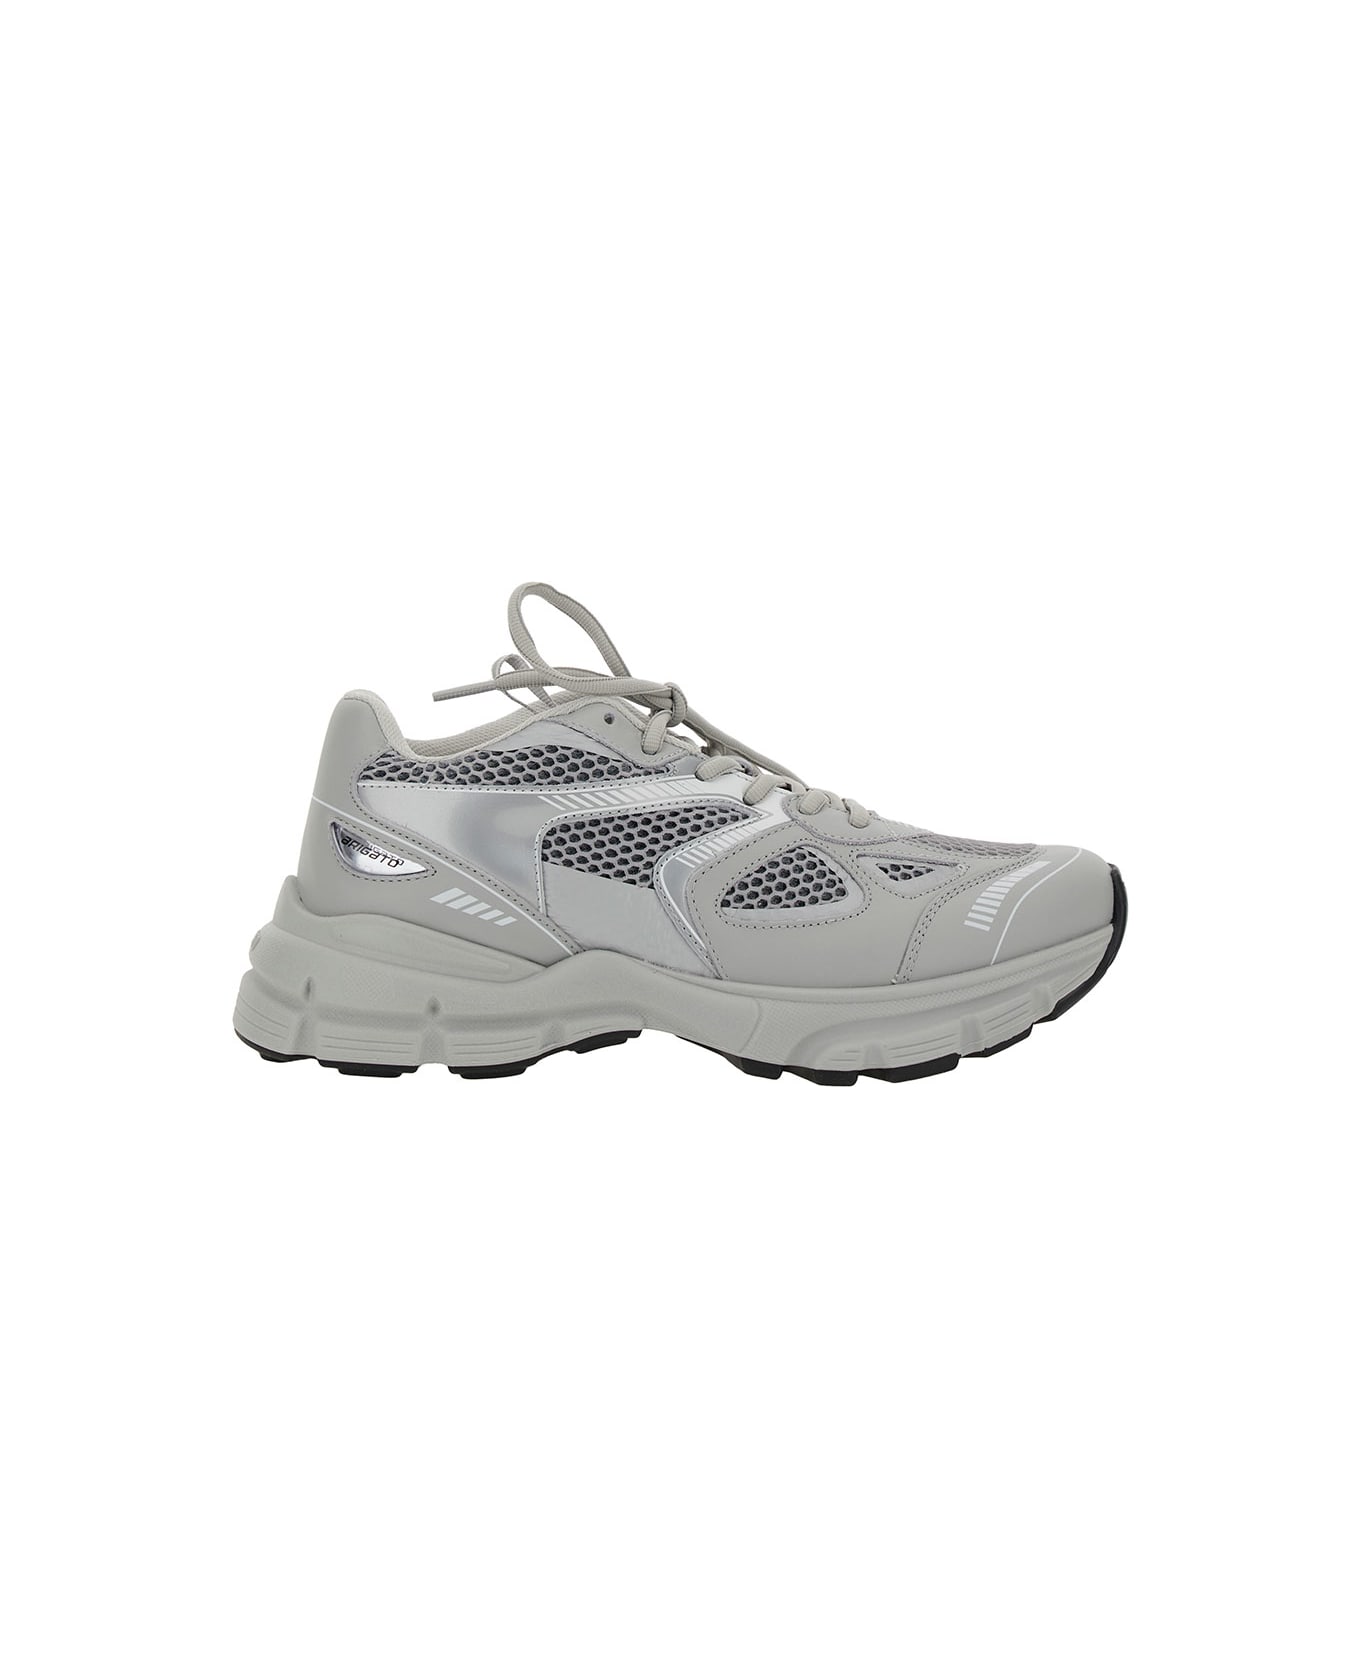 Axel Arigato 'marathon Runner' Grey Low Top Sneakers With Reflective Details In Leather Blend Woman - Grey